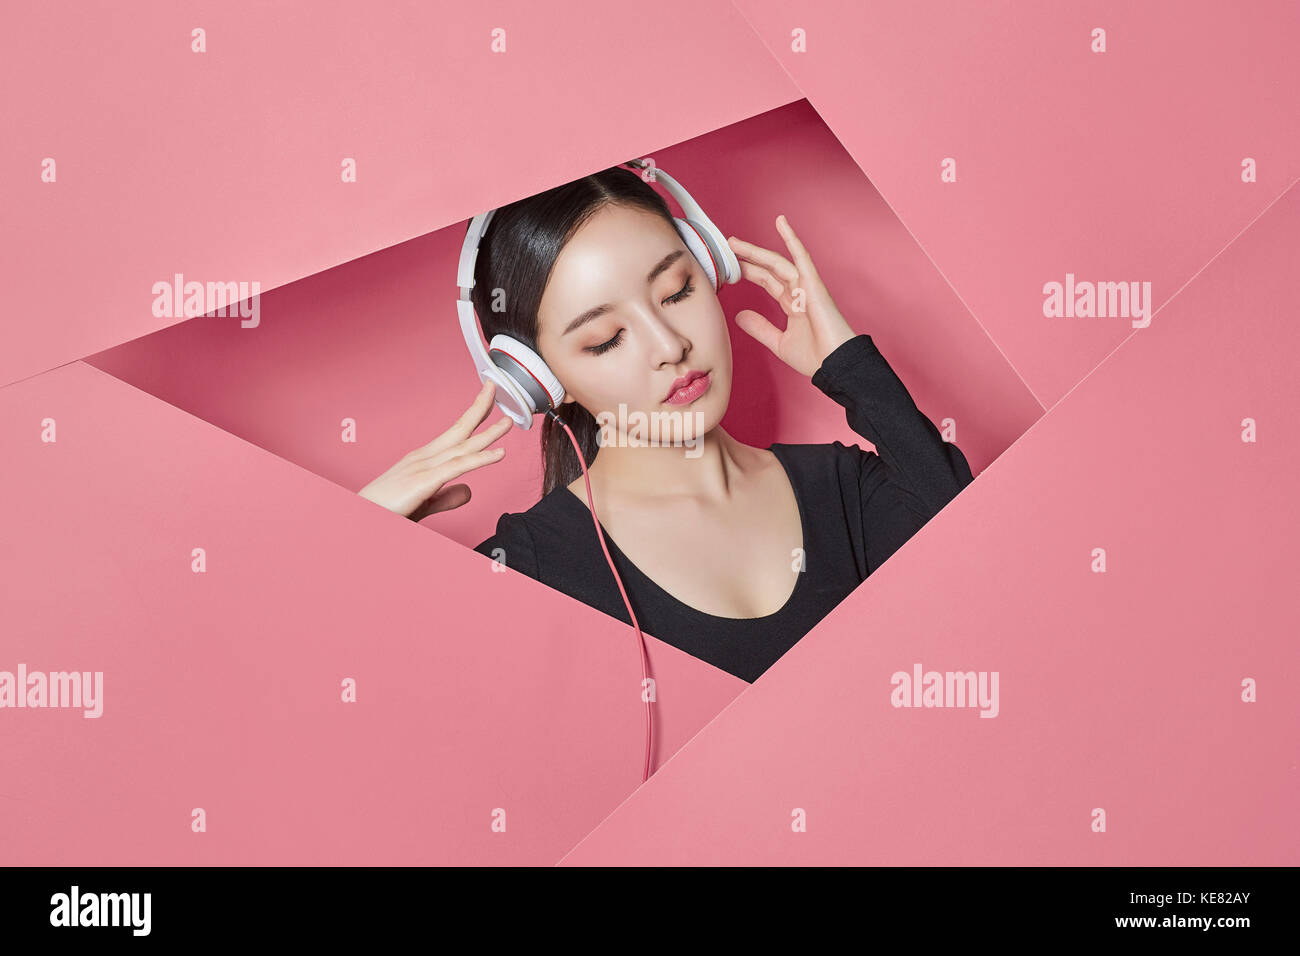 Portrait of young woman listening to music fermer Banque D'Images